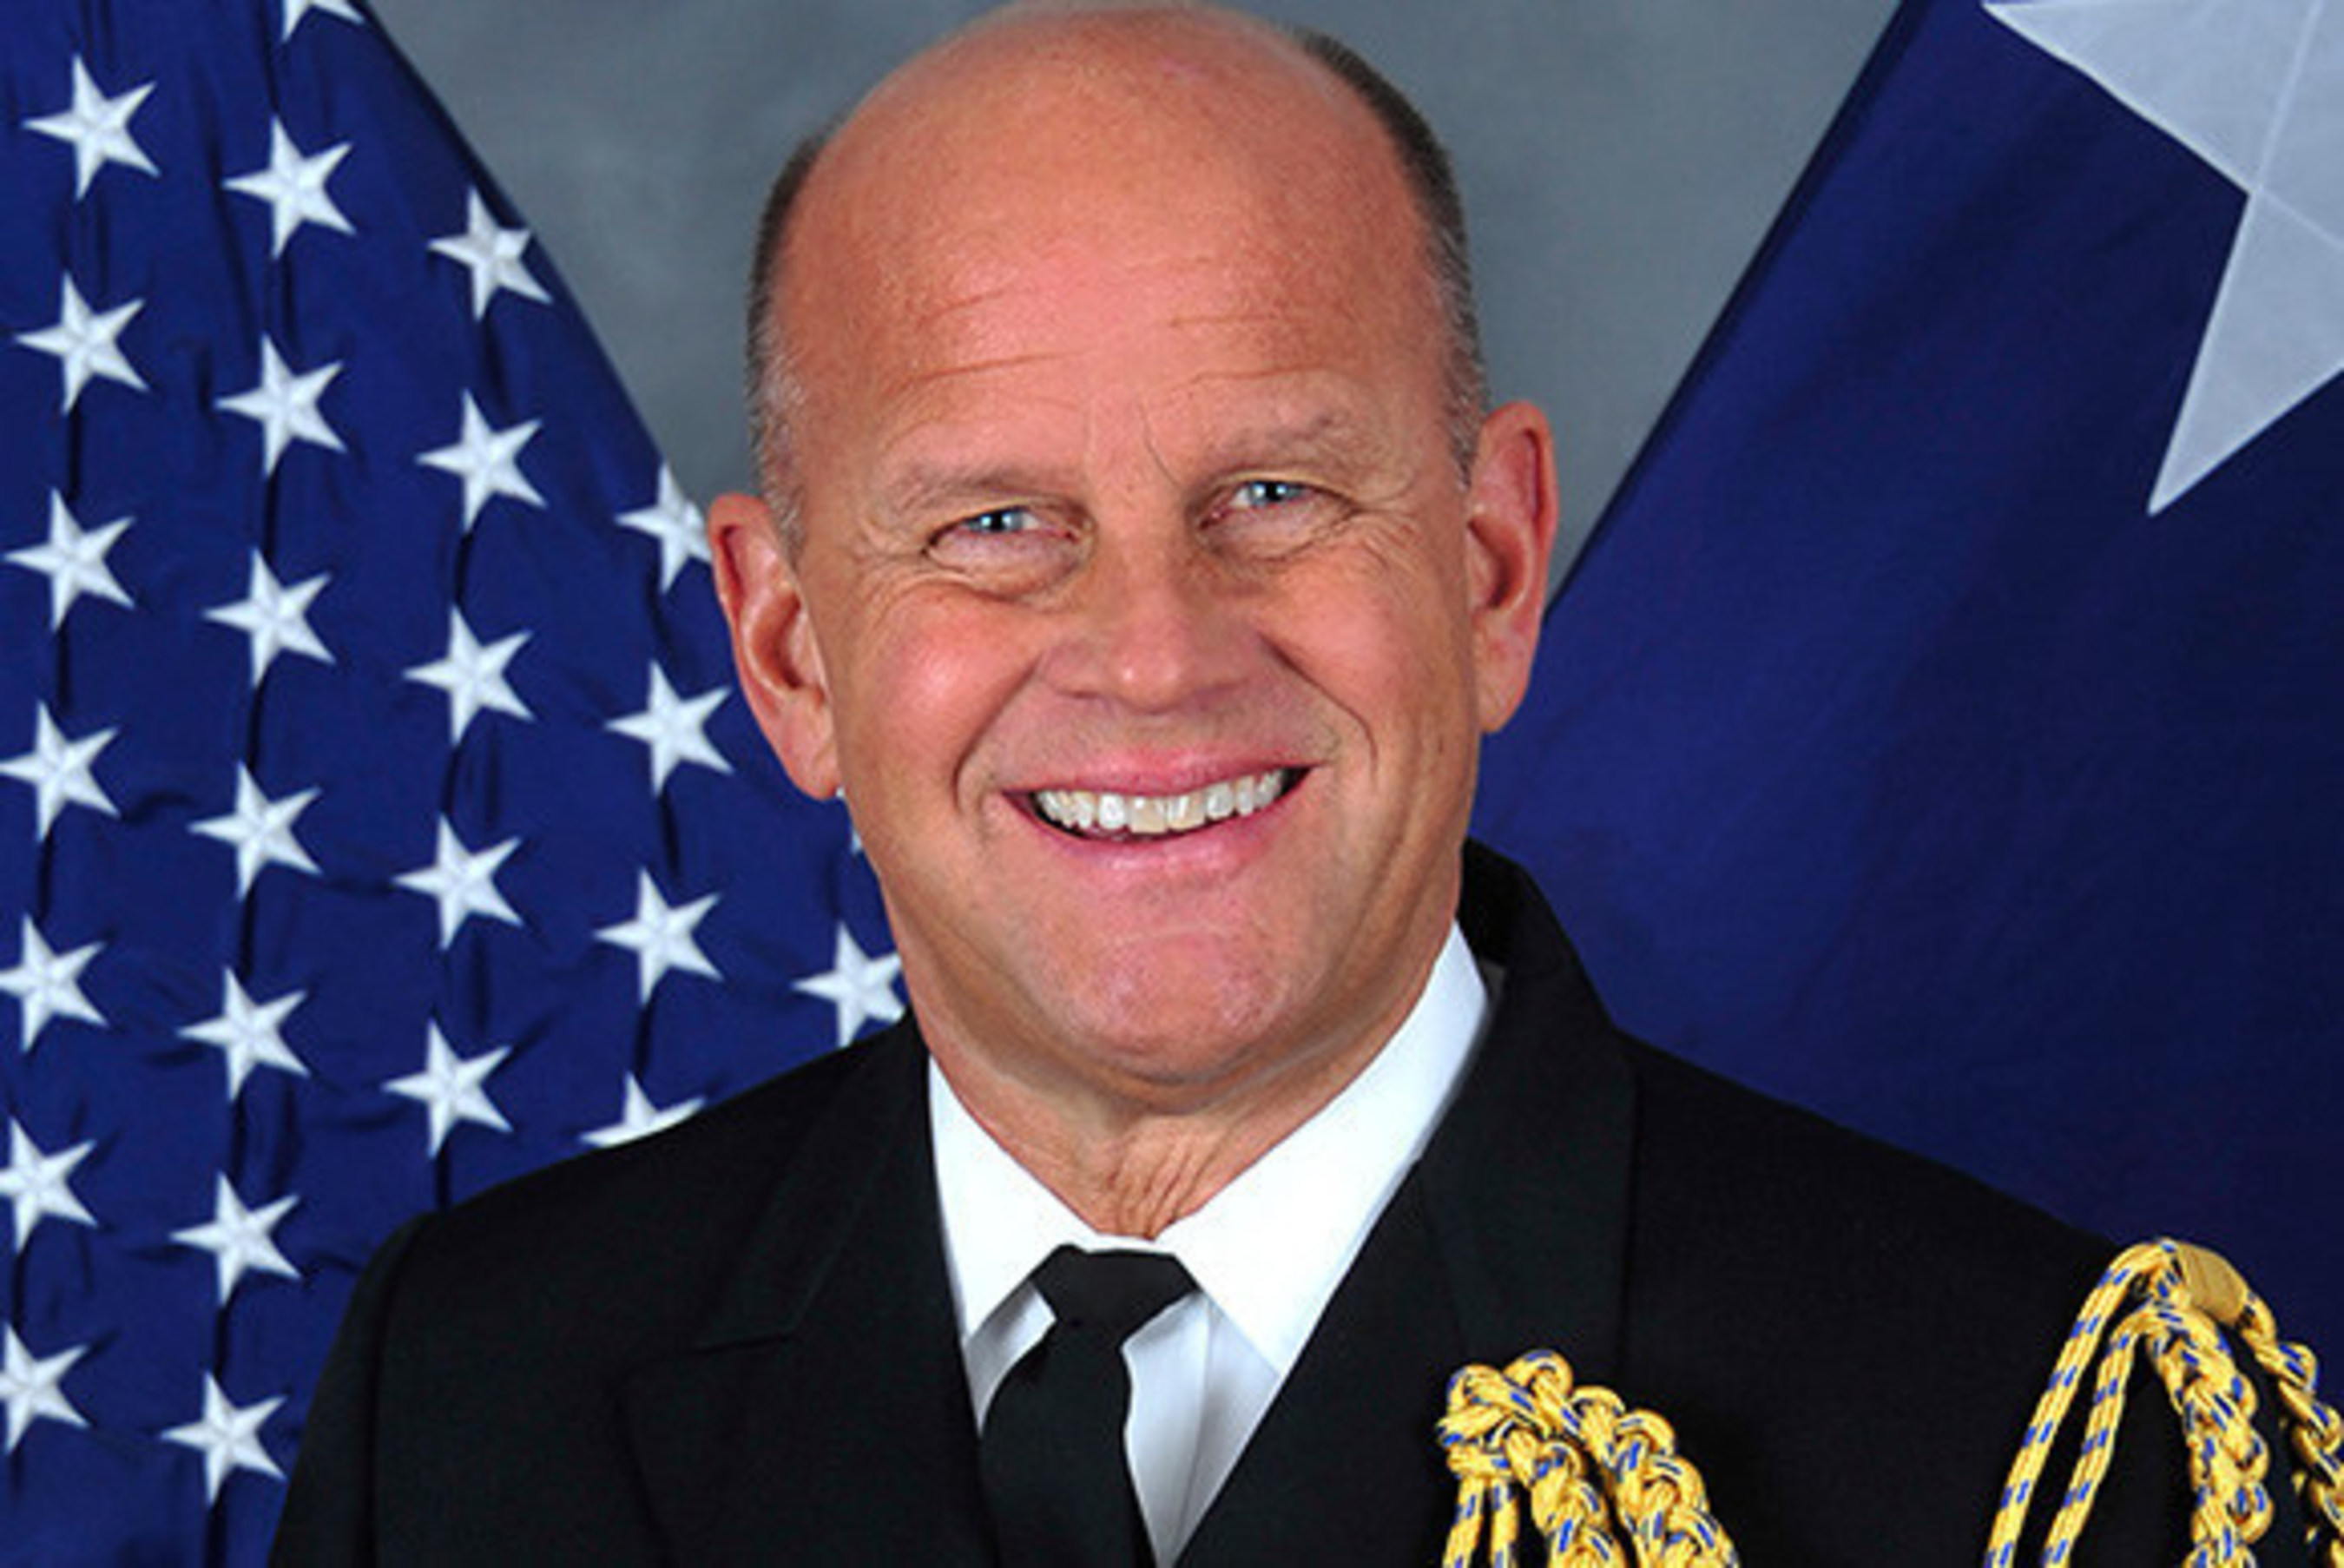 Retired RADM Gary W. Rosholt achieved the rank of Rear Admiral during his 35+ year career as a Navy SEAL which includes two-star Flag officer assignments as the Senior Defense Official in the US Embassy in Abu Dhabi and Deputy Commanding General for the Special Operations Command for the United States Central Command.